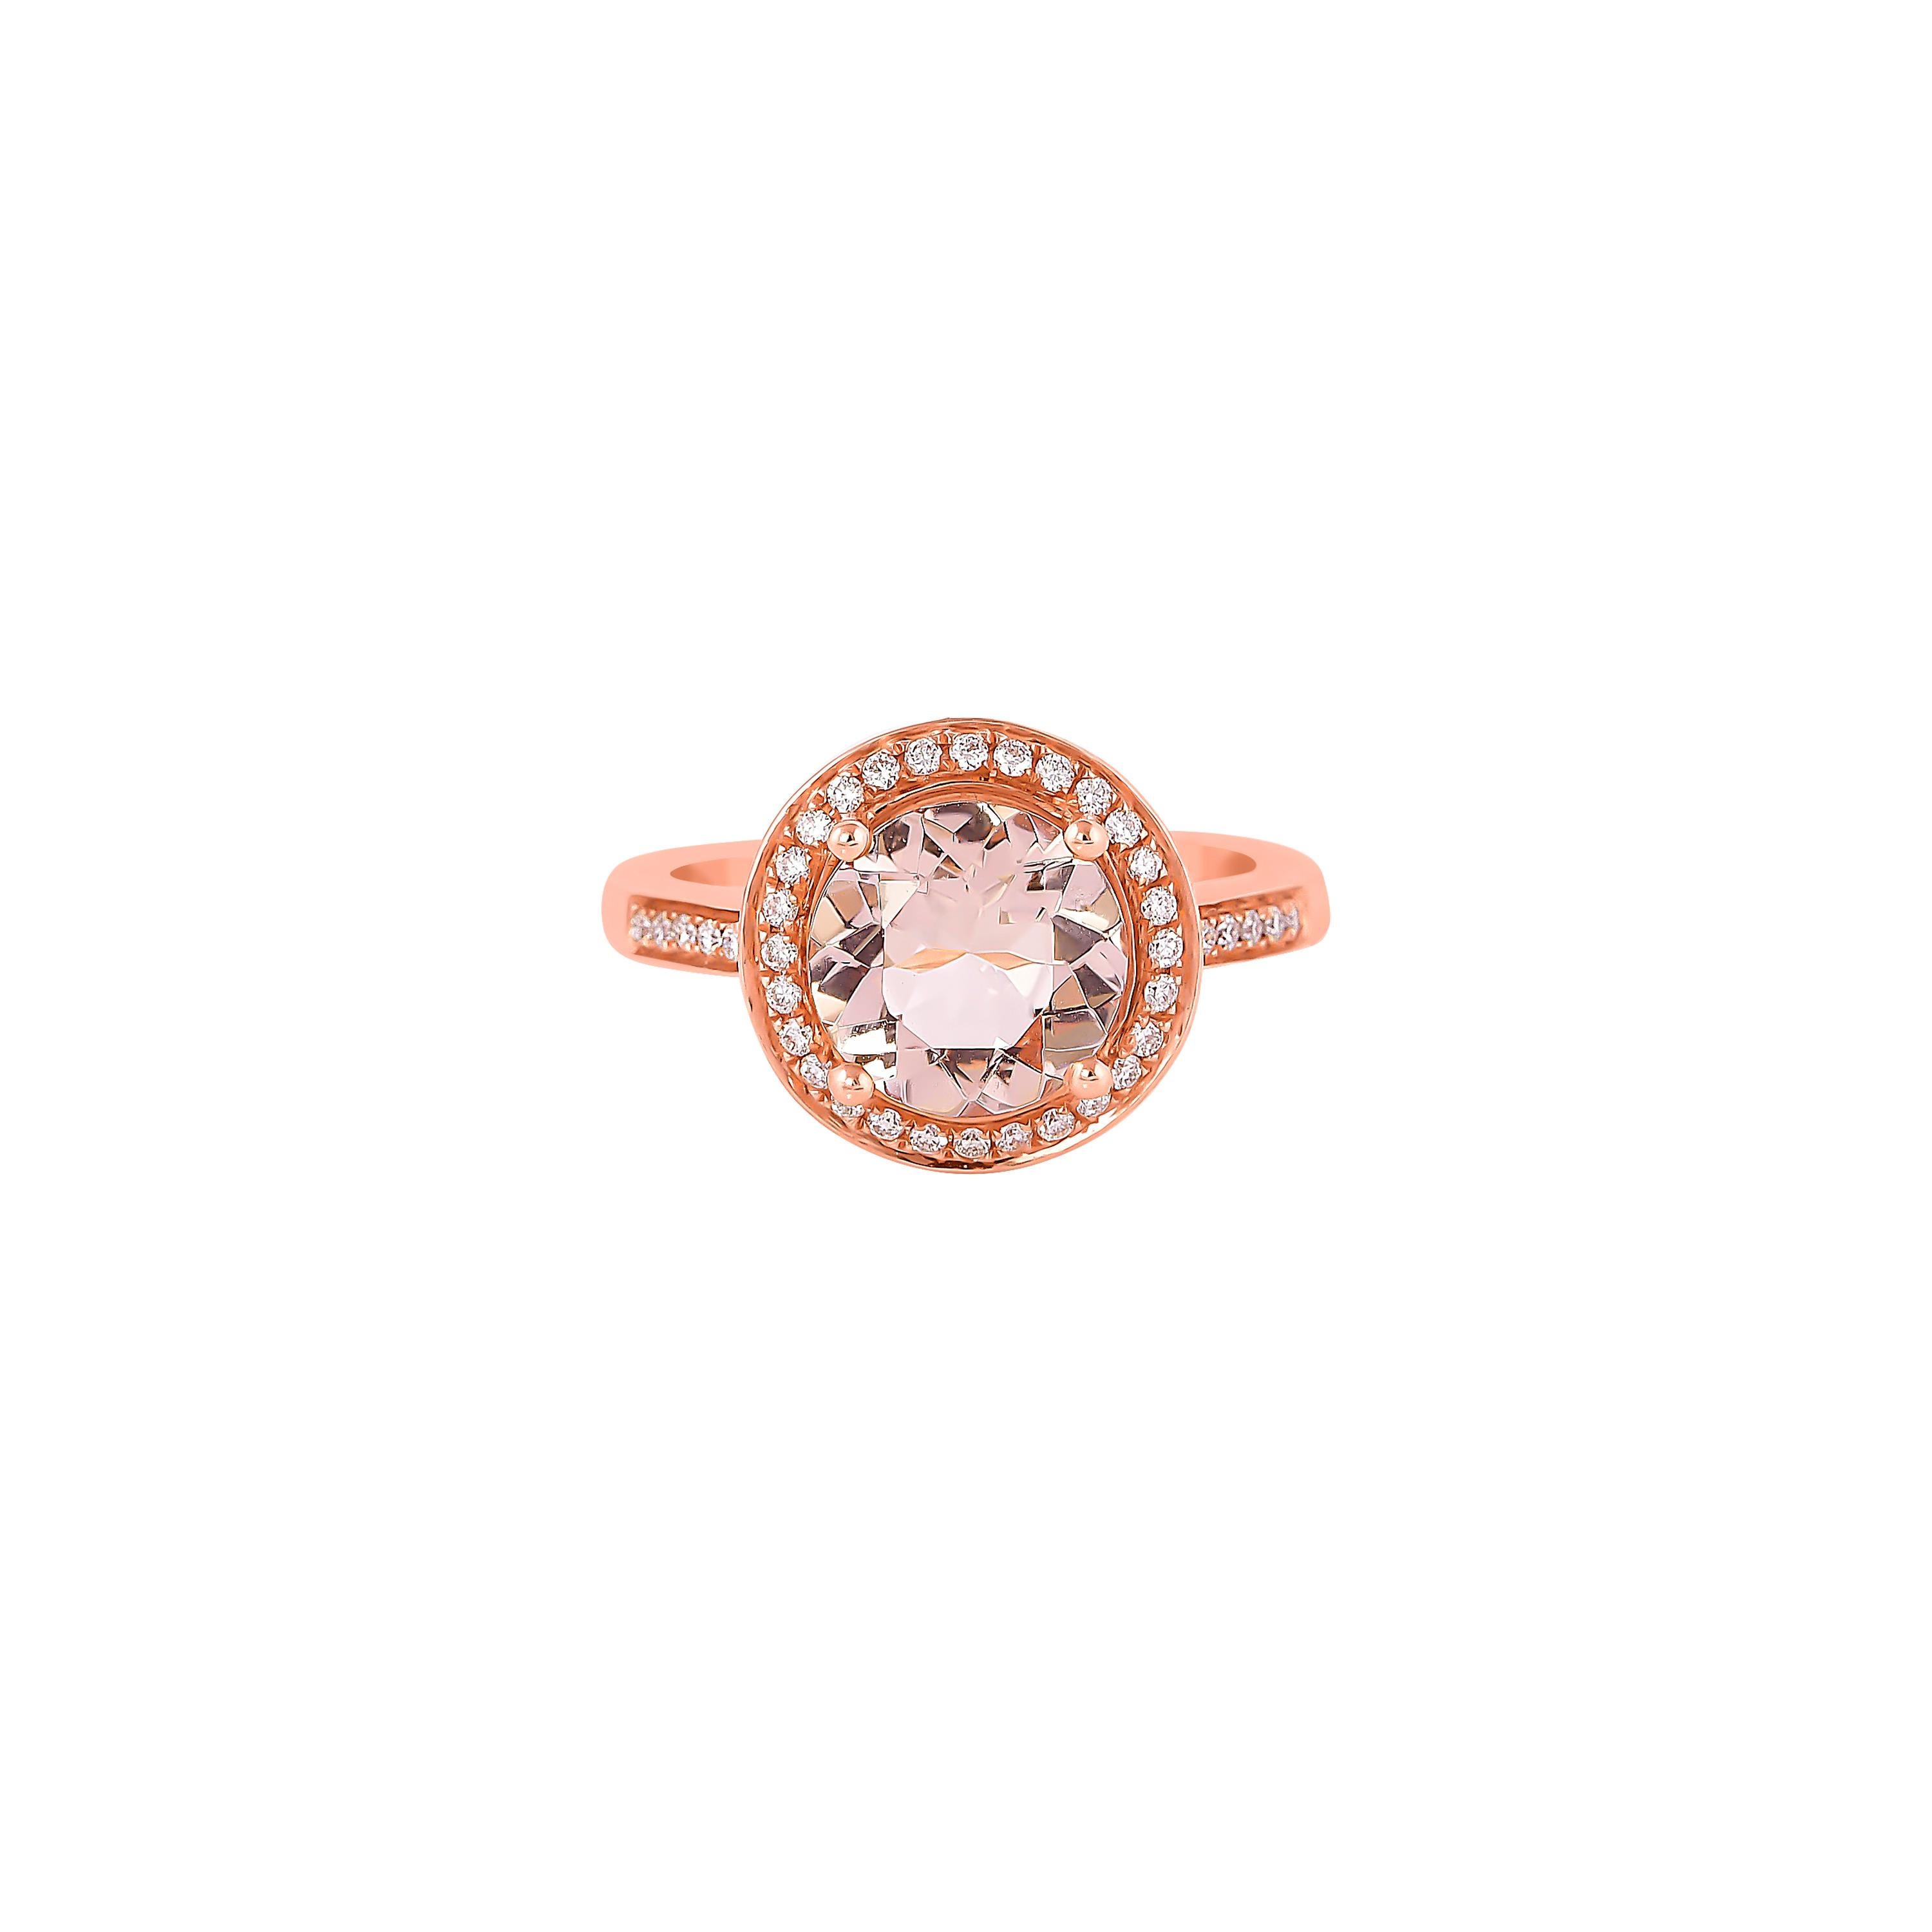 This collection features an array of magnificent morganites! Accented with diamonds these rings are made in rose gold and present a classic yet elegant look. 

Classic morganite ring in 18K rose gold with diamonds. 

Morganite: 2.24 carat round